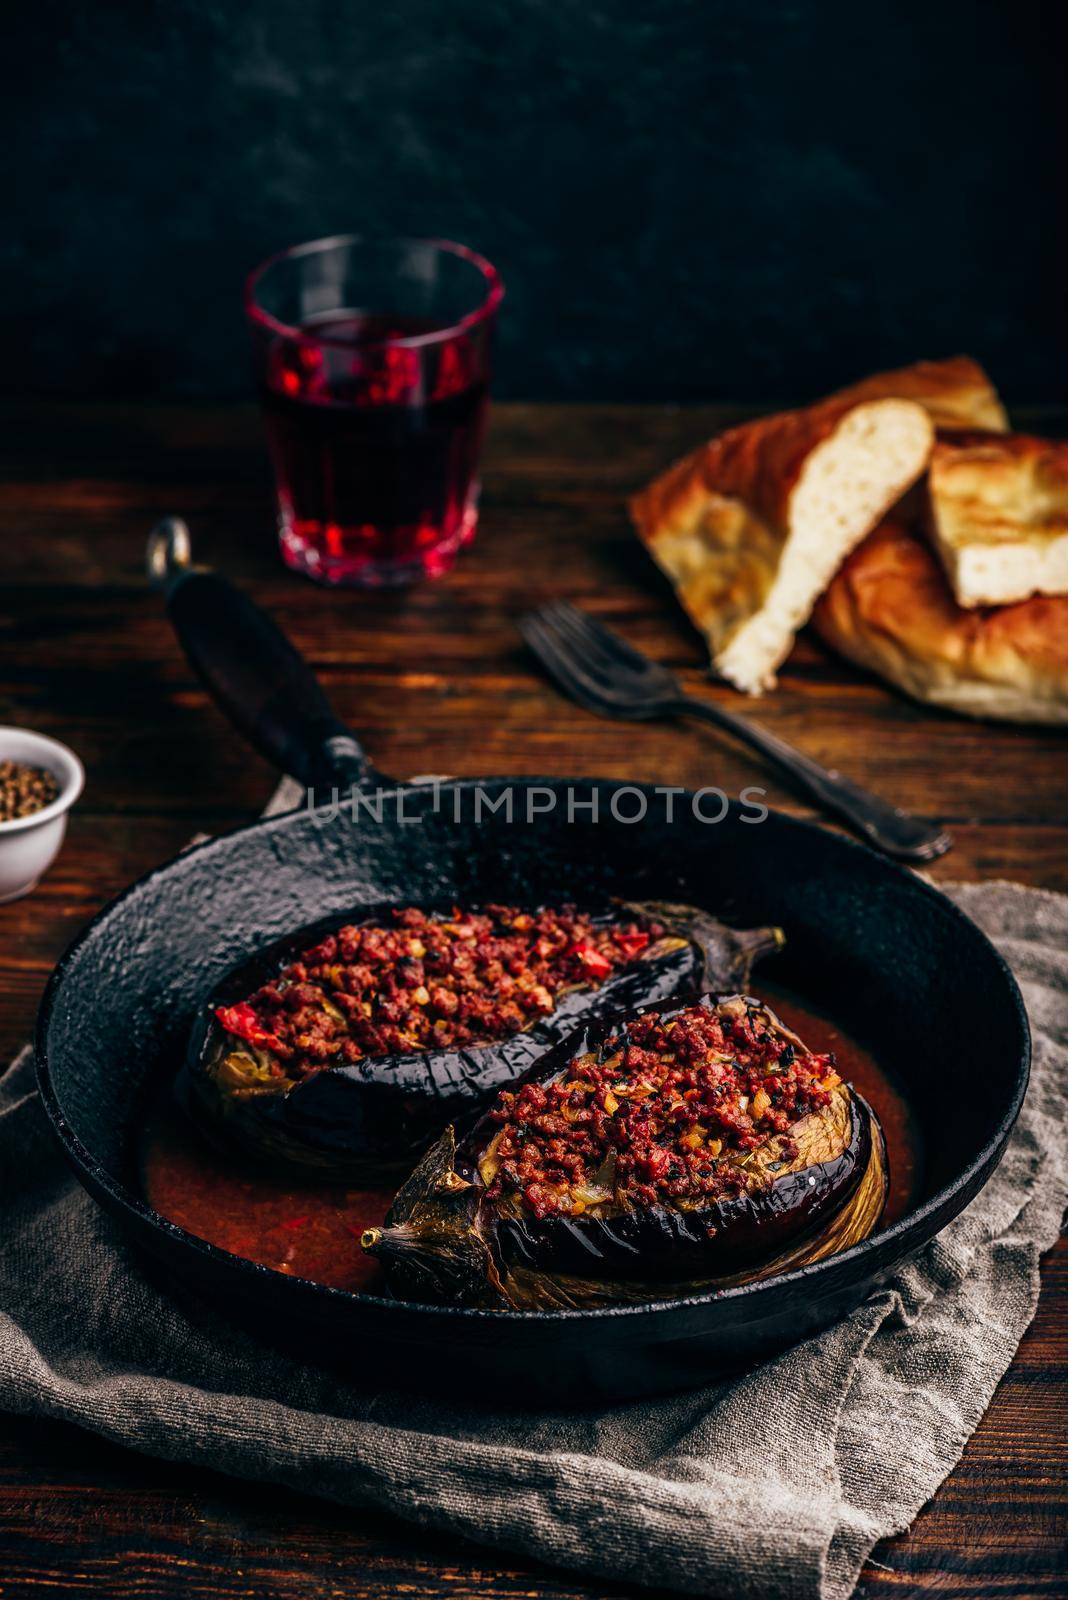 Eggplants stuffed with ground beef, tomatoes and spices in frying pan. Traditional dish Karniyarik of turkish cuisine